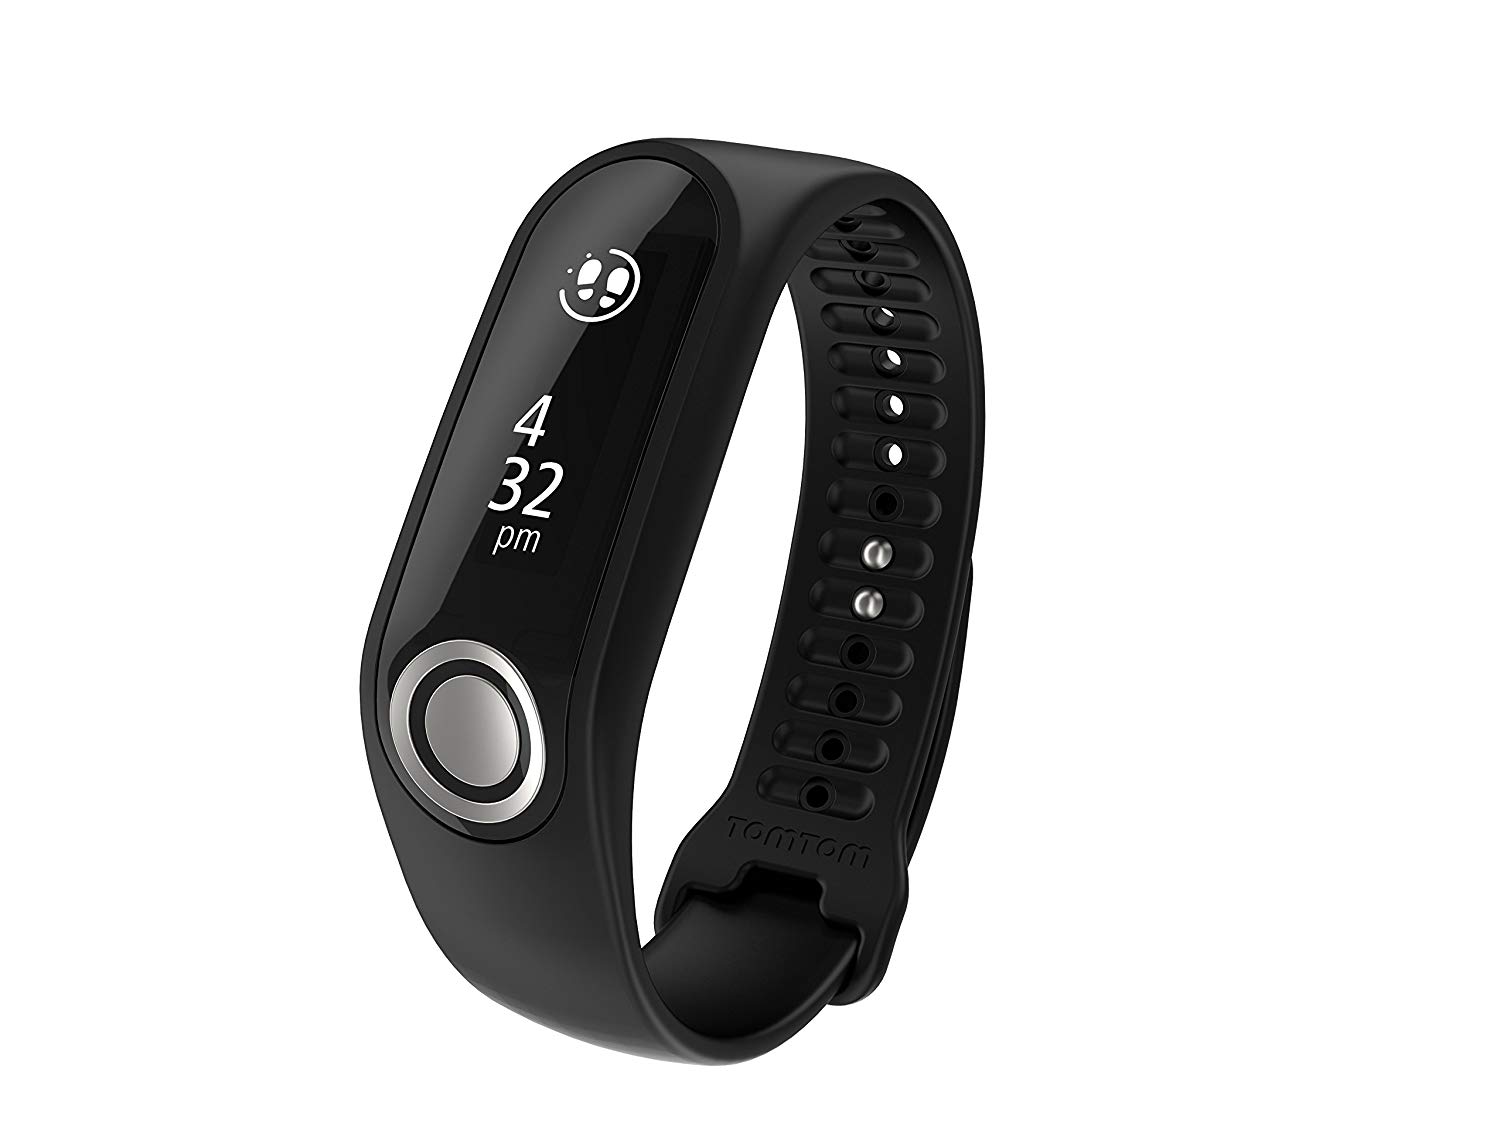 tomtom fitness trackers